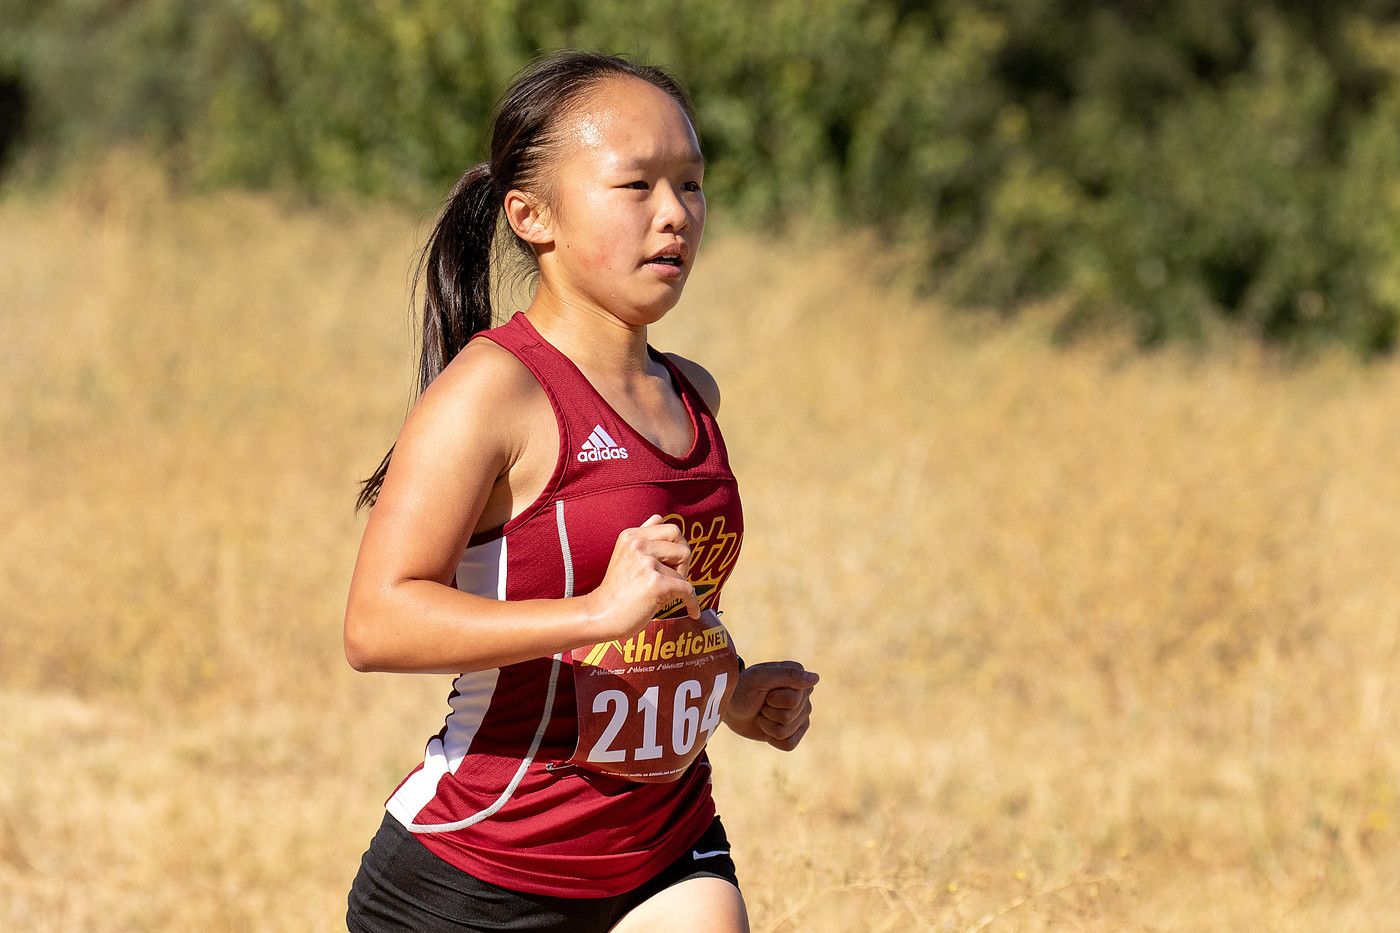 Wong led the Panthers at the Race for the Arts on Friday finishing 30th overall in the female division